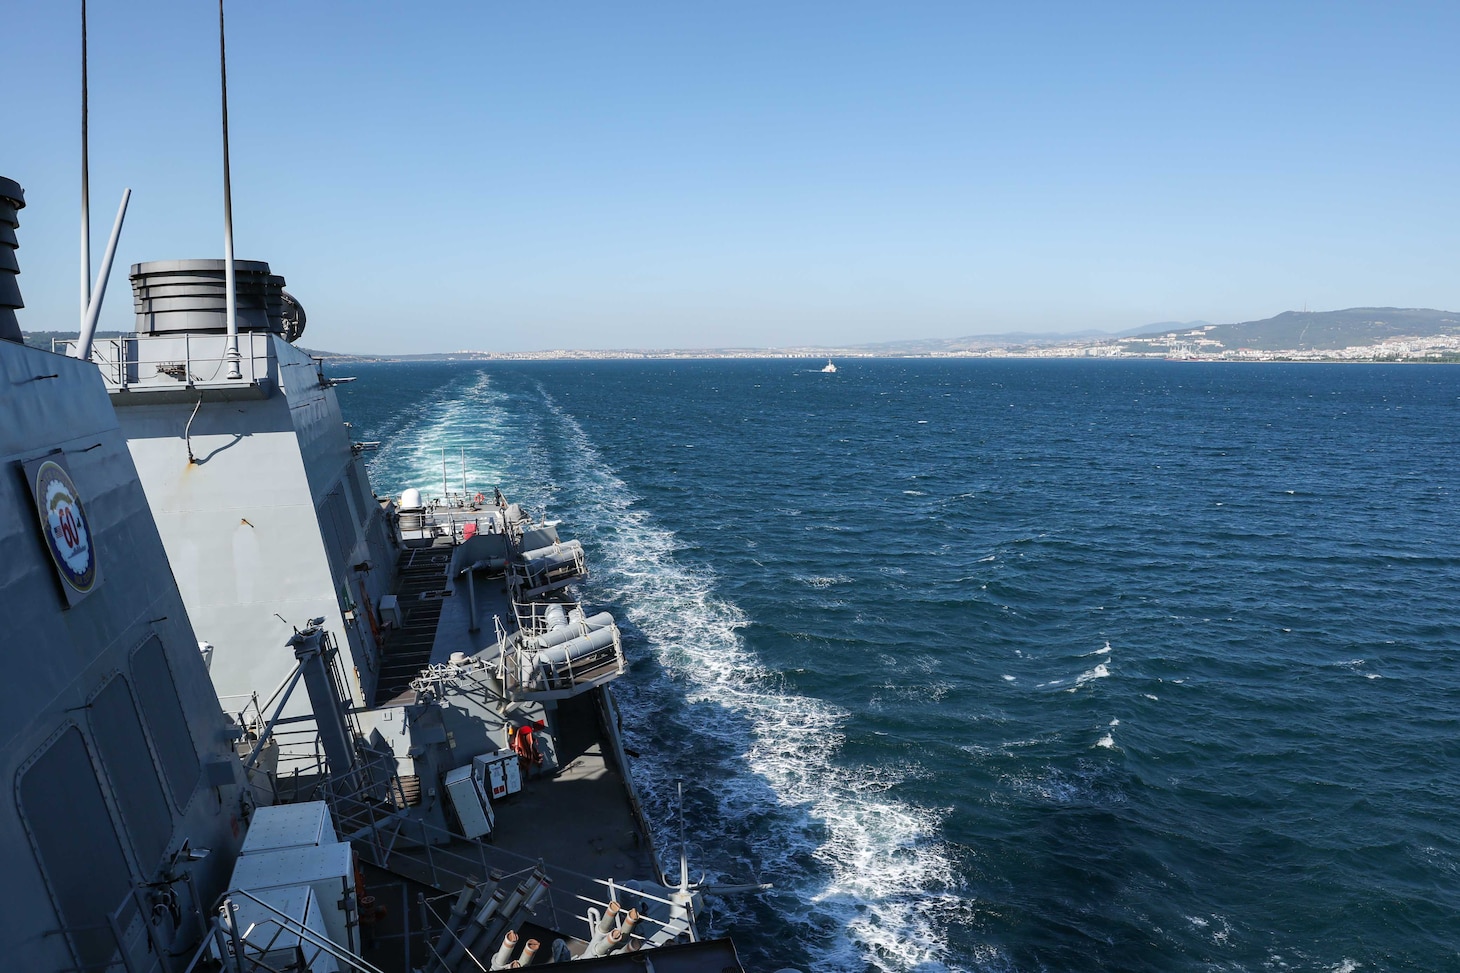 (July 16, 2021) The Arleigh Burke-class guided-missile destroyer USS Ross (DDG 71) transits to the Sea of Marmara, July 16, 2021. Ross, forward-deployed to Rota, Spain, is on patrol in the U.S. Sixth Fleet area of operations in support of regional allies and partners and U.S. national security interests in Europe and Africa.